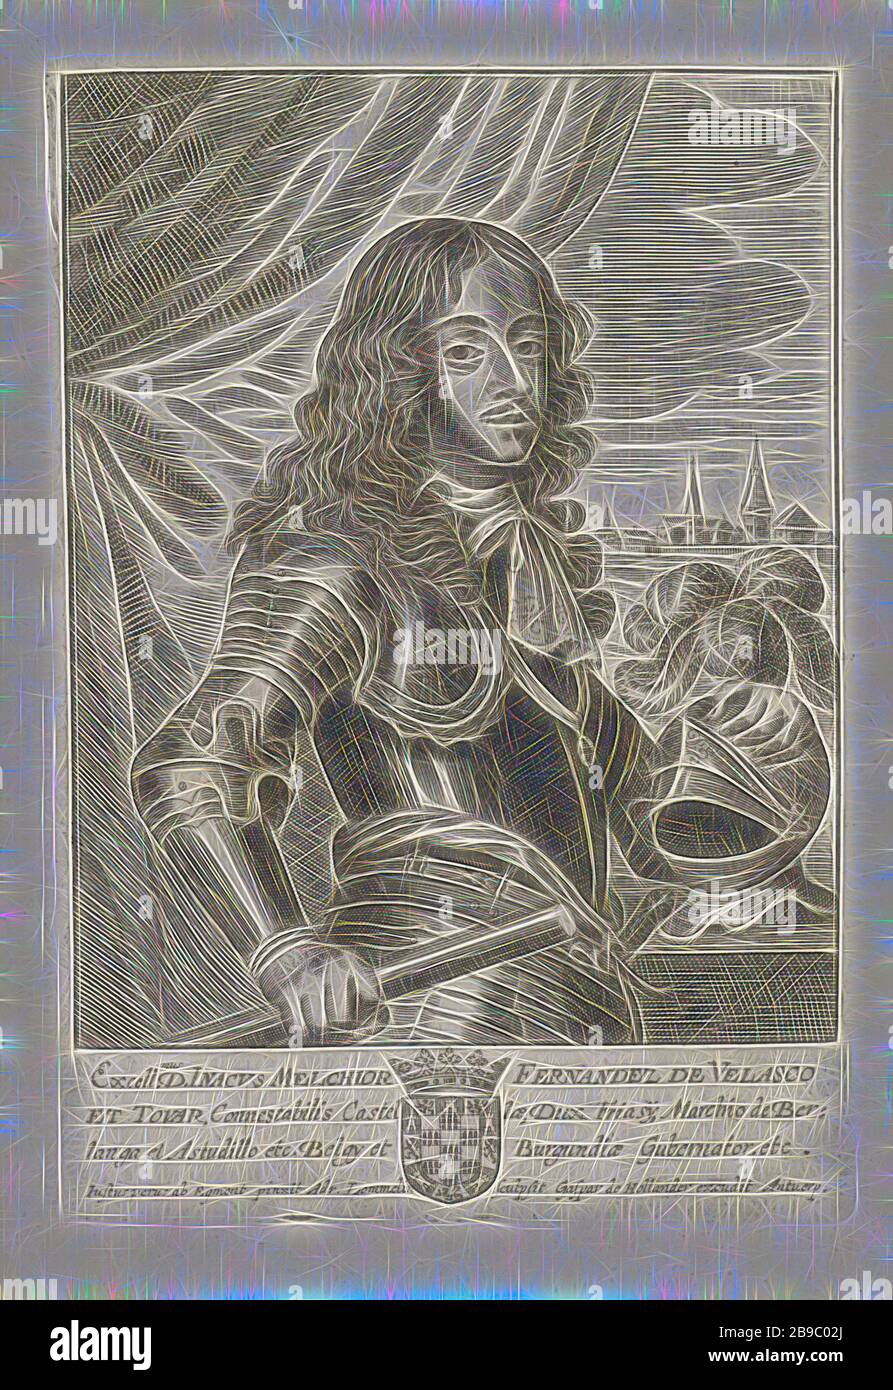 Portrait of Inacho Melchior Ferdinand de Velasco, constable of Velasco and Tovar, governor of Belgium and Burgundy. In the margin the family crest of the person portrayed, Inacho Melchior Ferdinand de, constable of Velasco, Adriaen Lommelin (mentioned on object), Antwerp, 1652 - 1677, paper, engraving, h 182 mm × w 125 mm, Reimagined by Gibon, design of warm cheerful glowing of brightness and light rays radiance. Classic art reinvented with a modern twist. Photography inspired by futurism, embracing dynamic energy of modern technology, movement, speed and revolutionize culture. Stock Photo